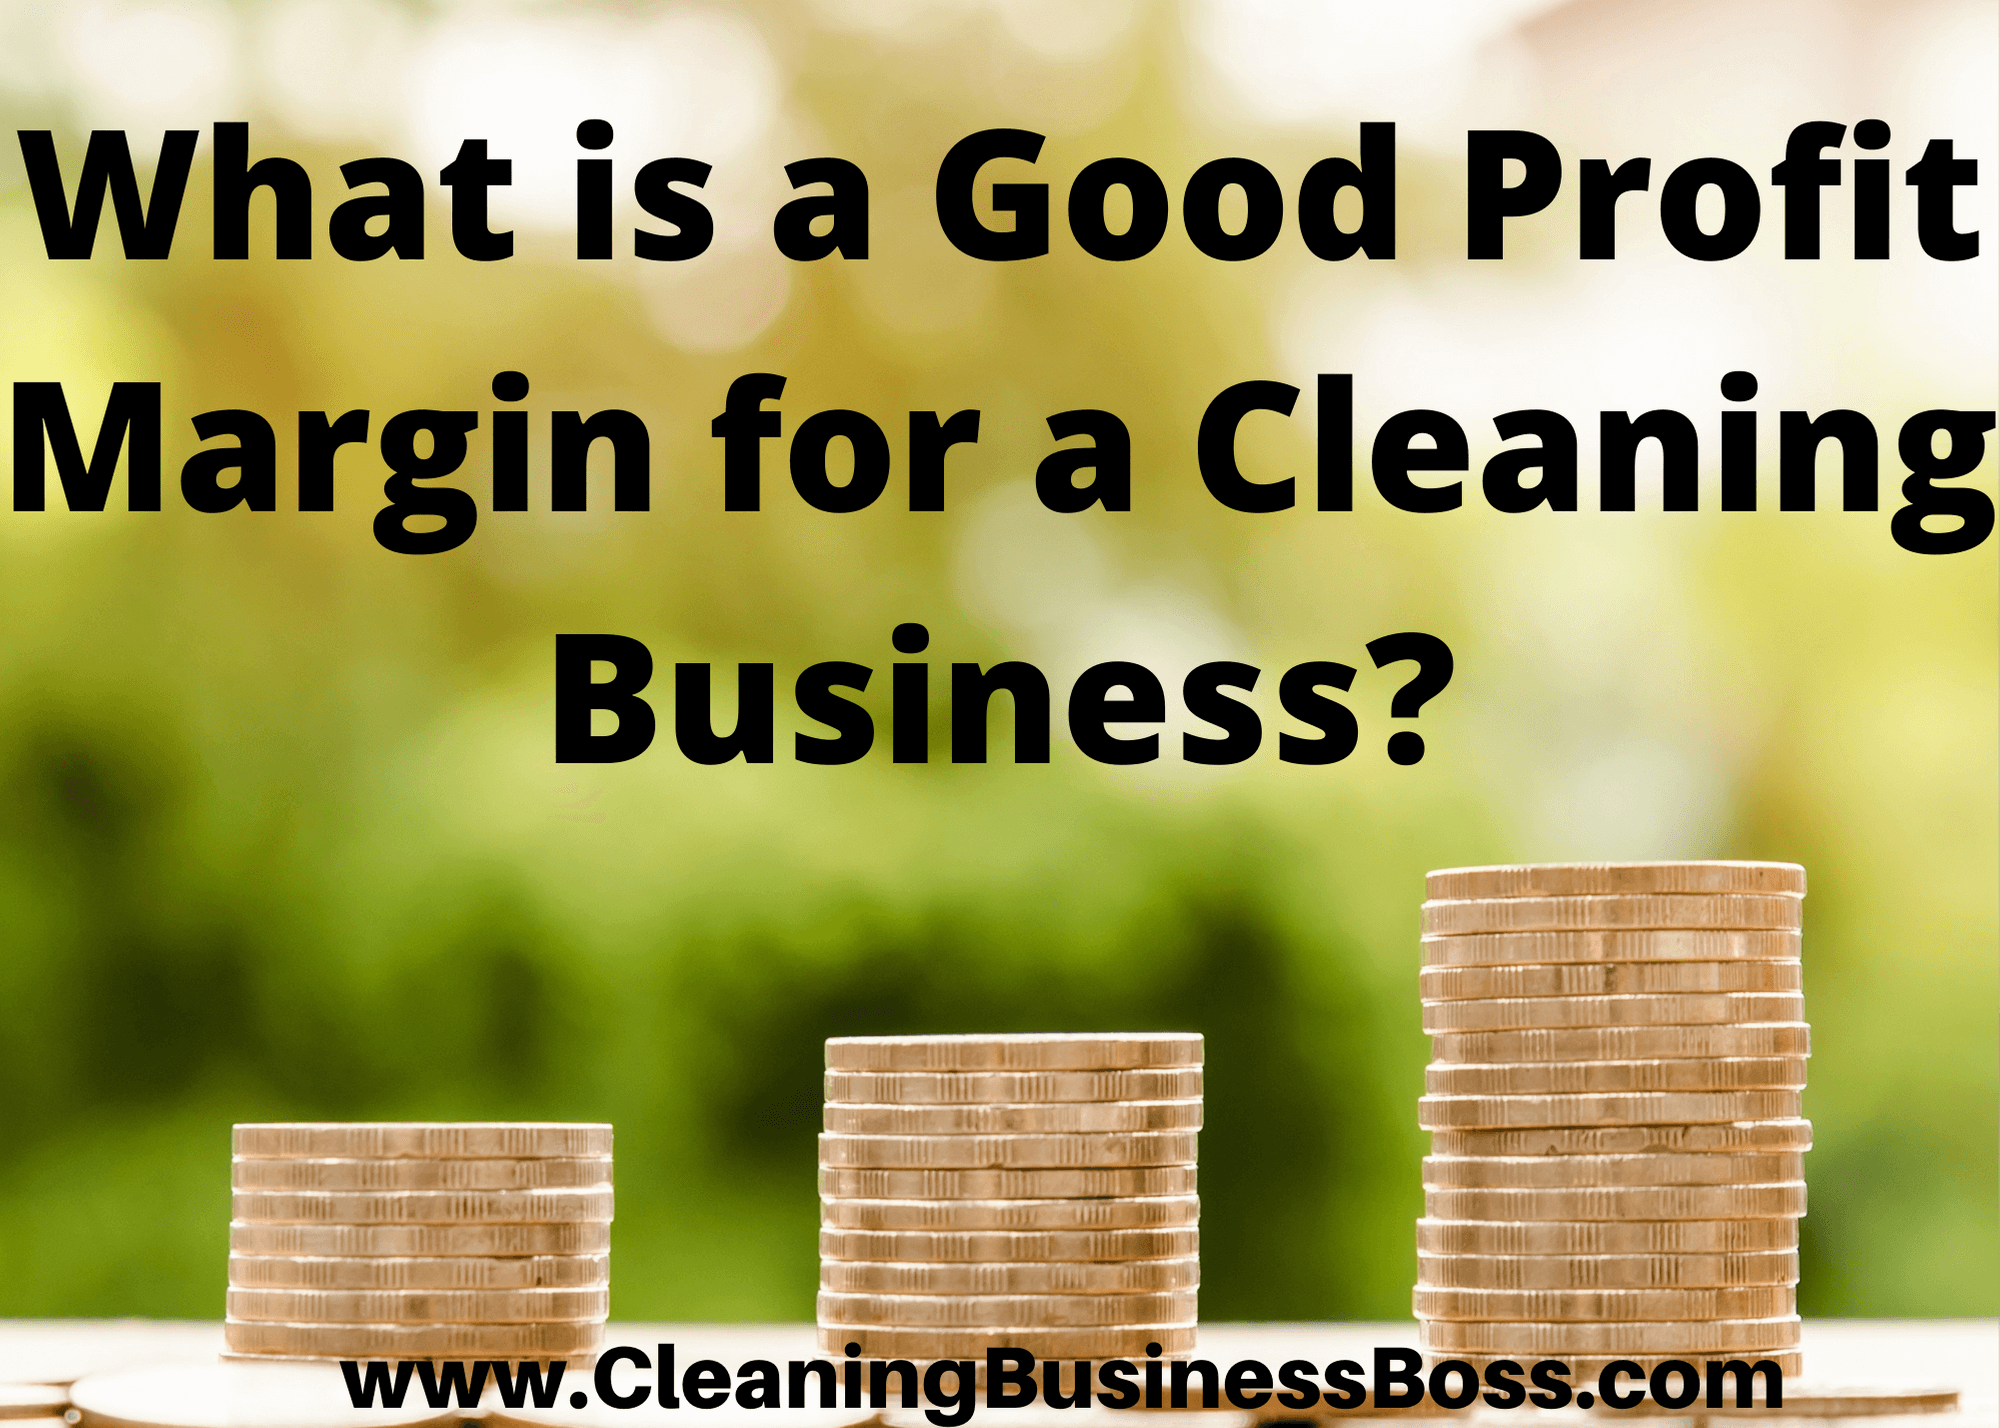 What Is a Good Profit Margin for a Cleaning Business?